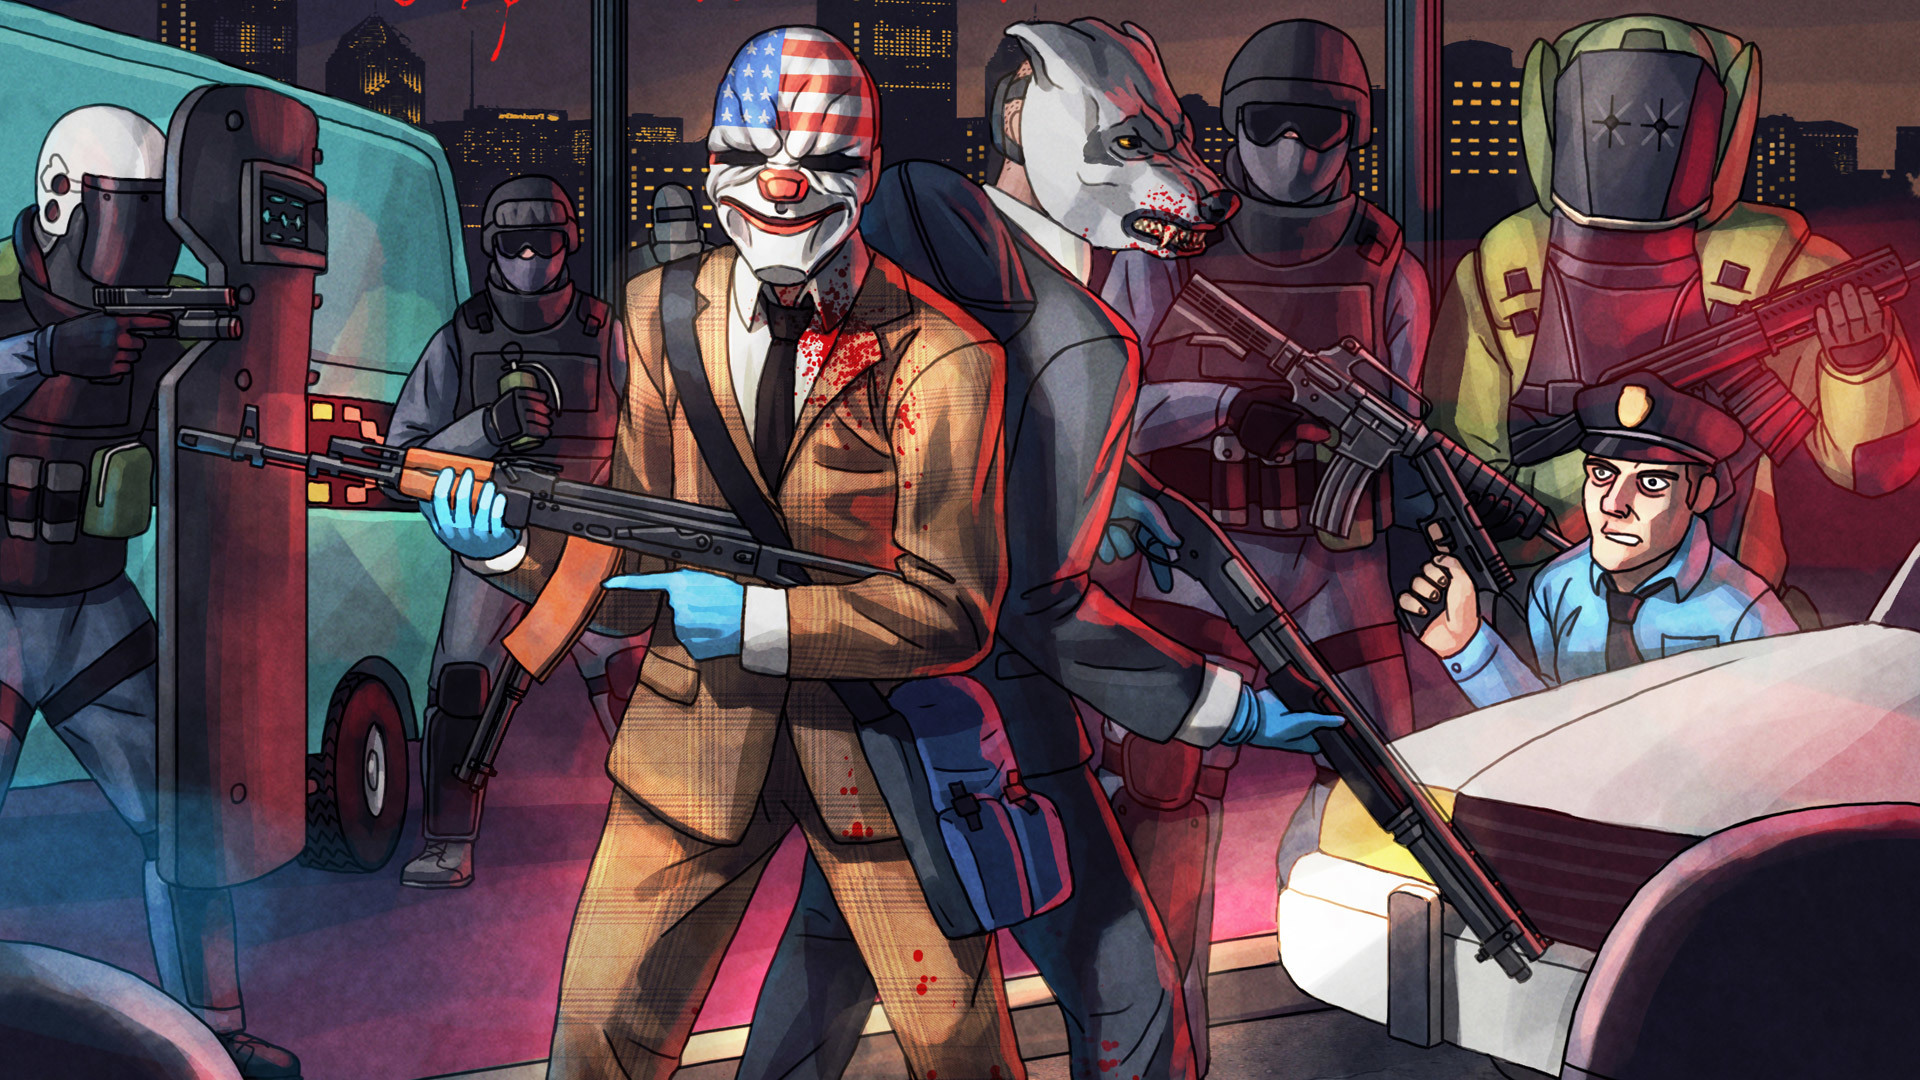 Wallpapers Payday 2 robbery gunfight on the desktop